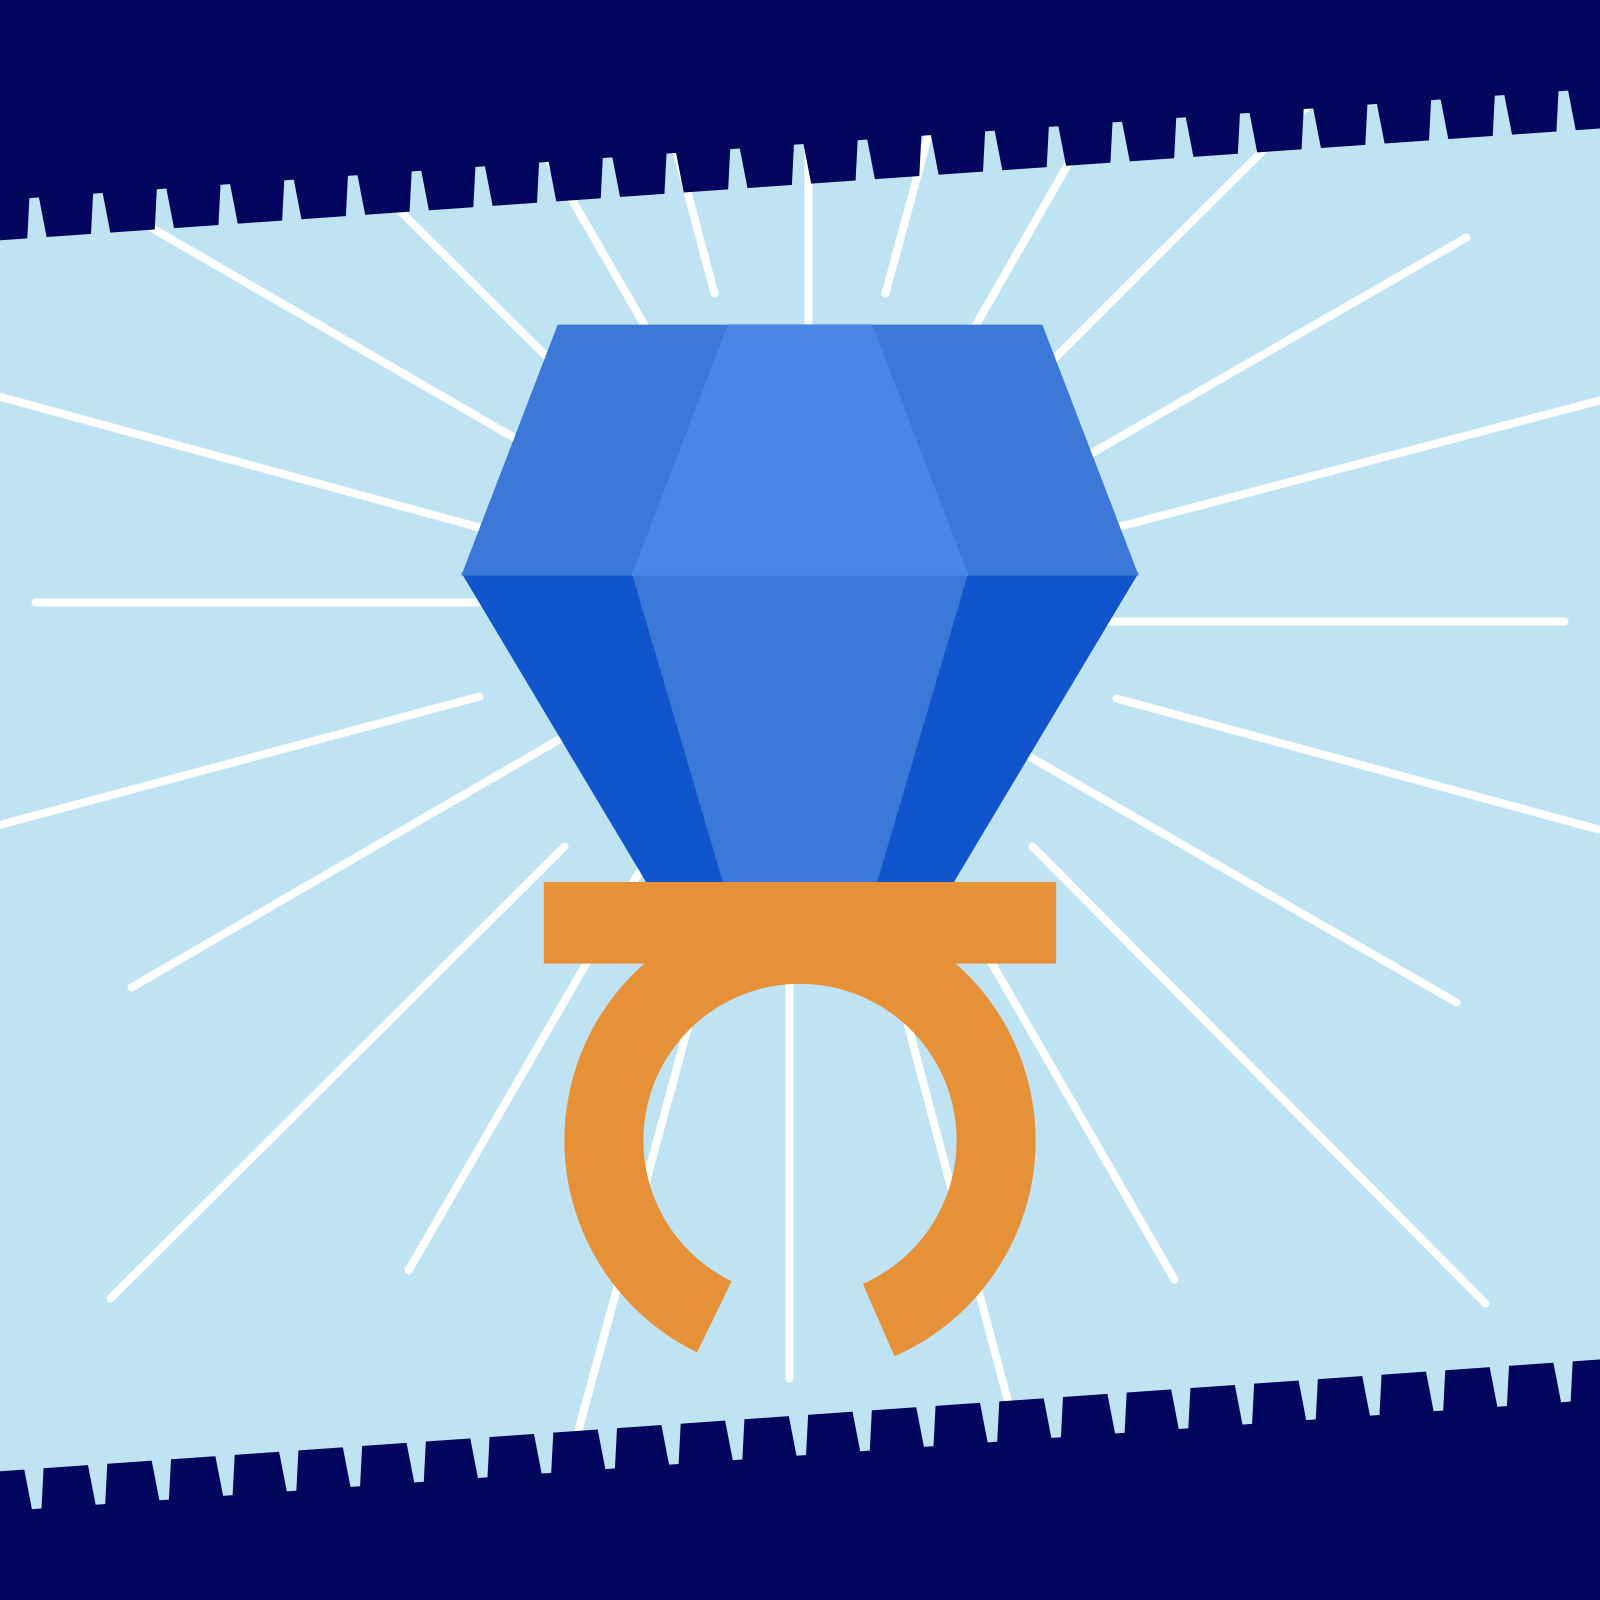 Drawing of a blue diamond-shaped lollipop on a ring